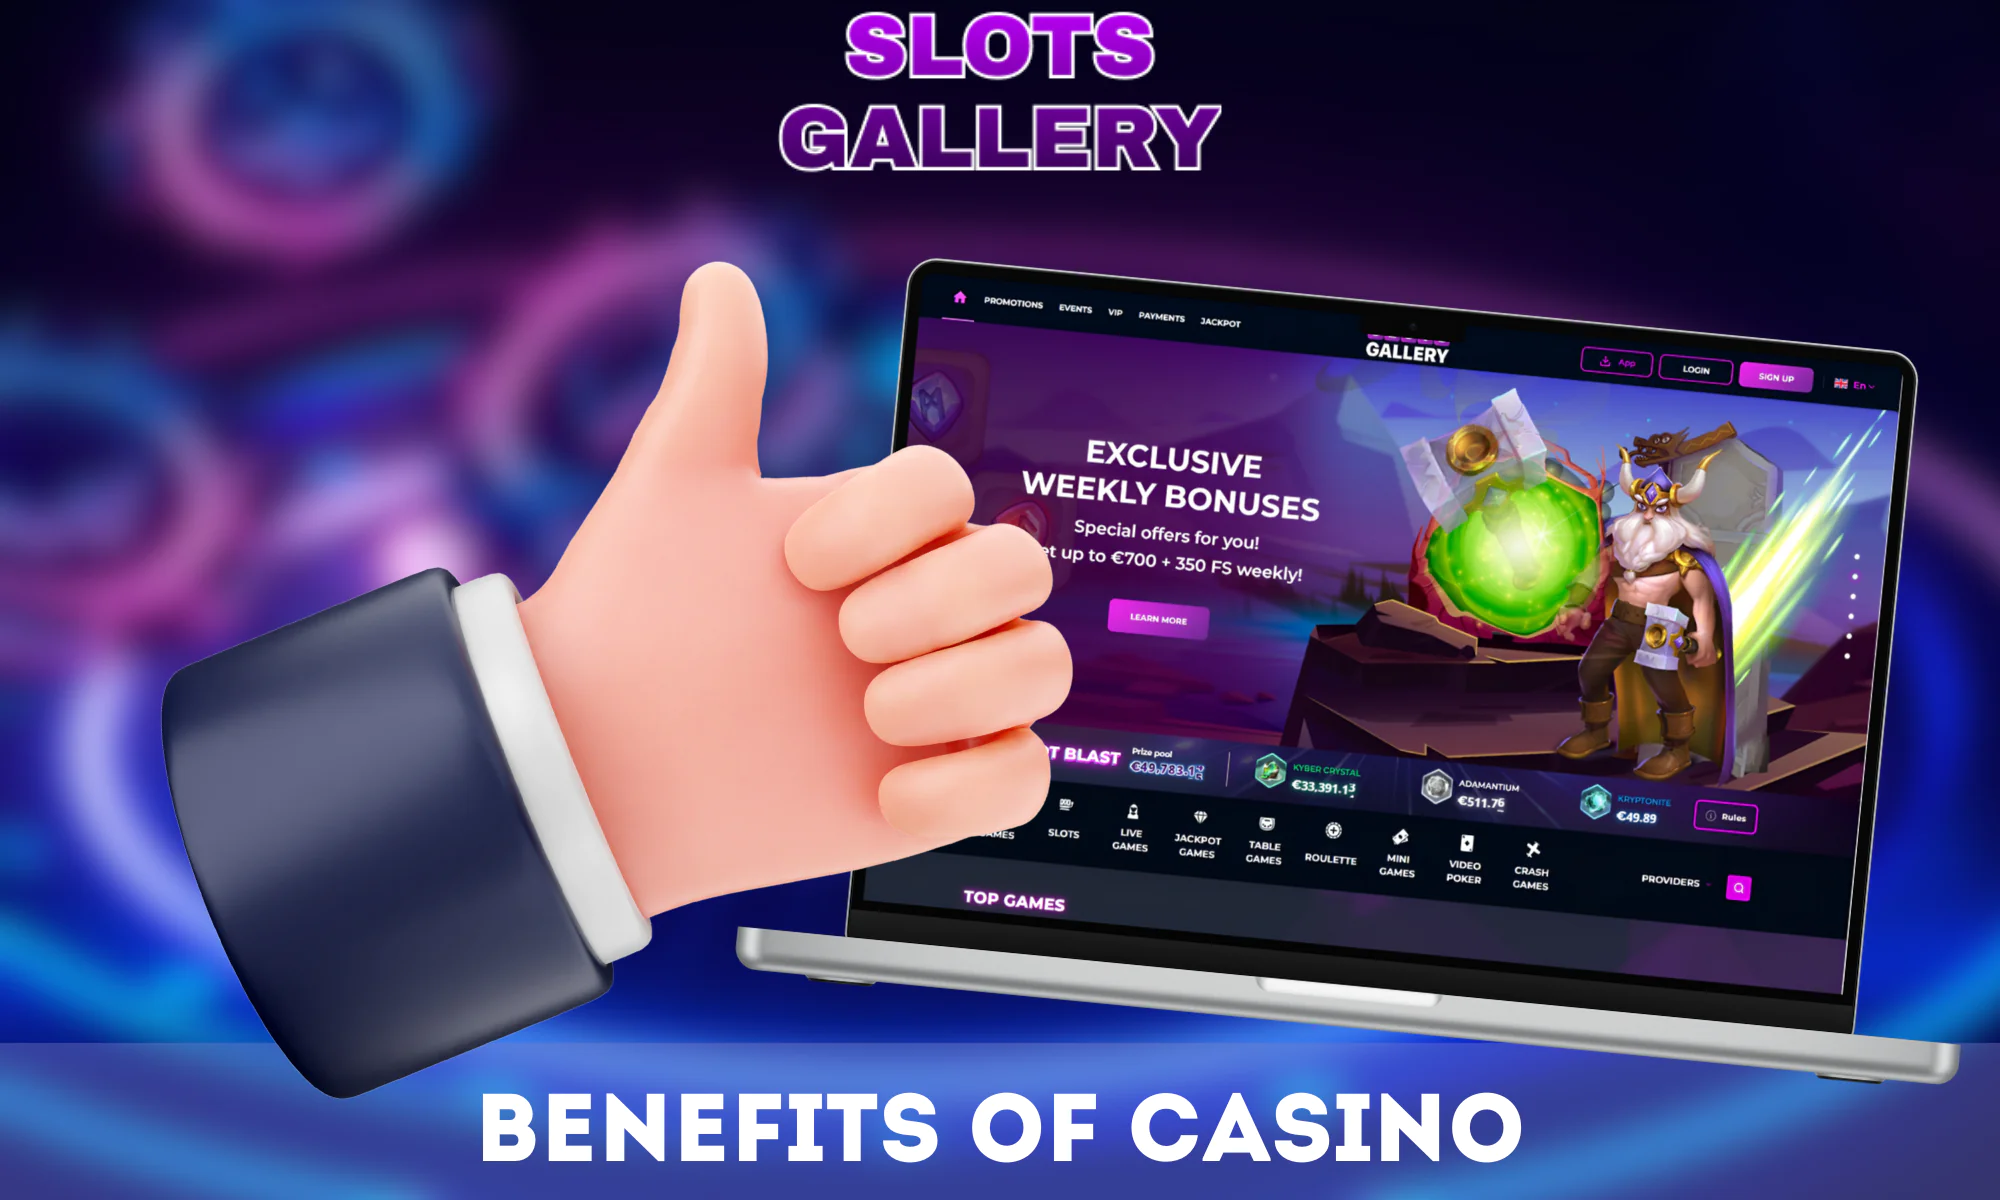 Slots Gallery offers many benefits to players, from beginners to seasoned gamblers